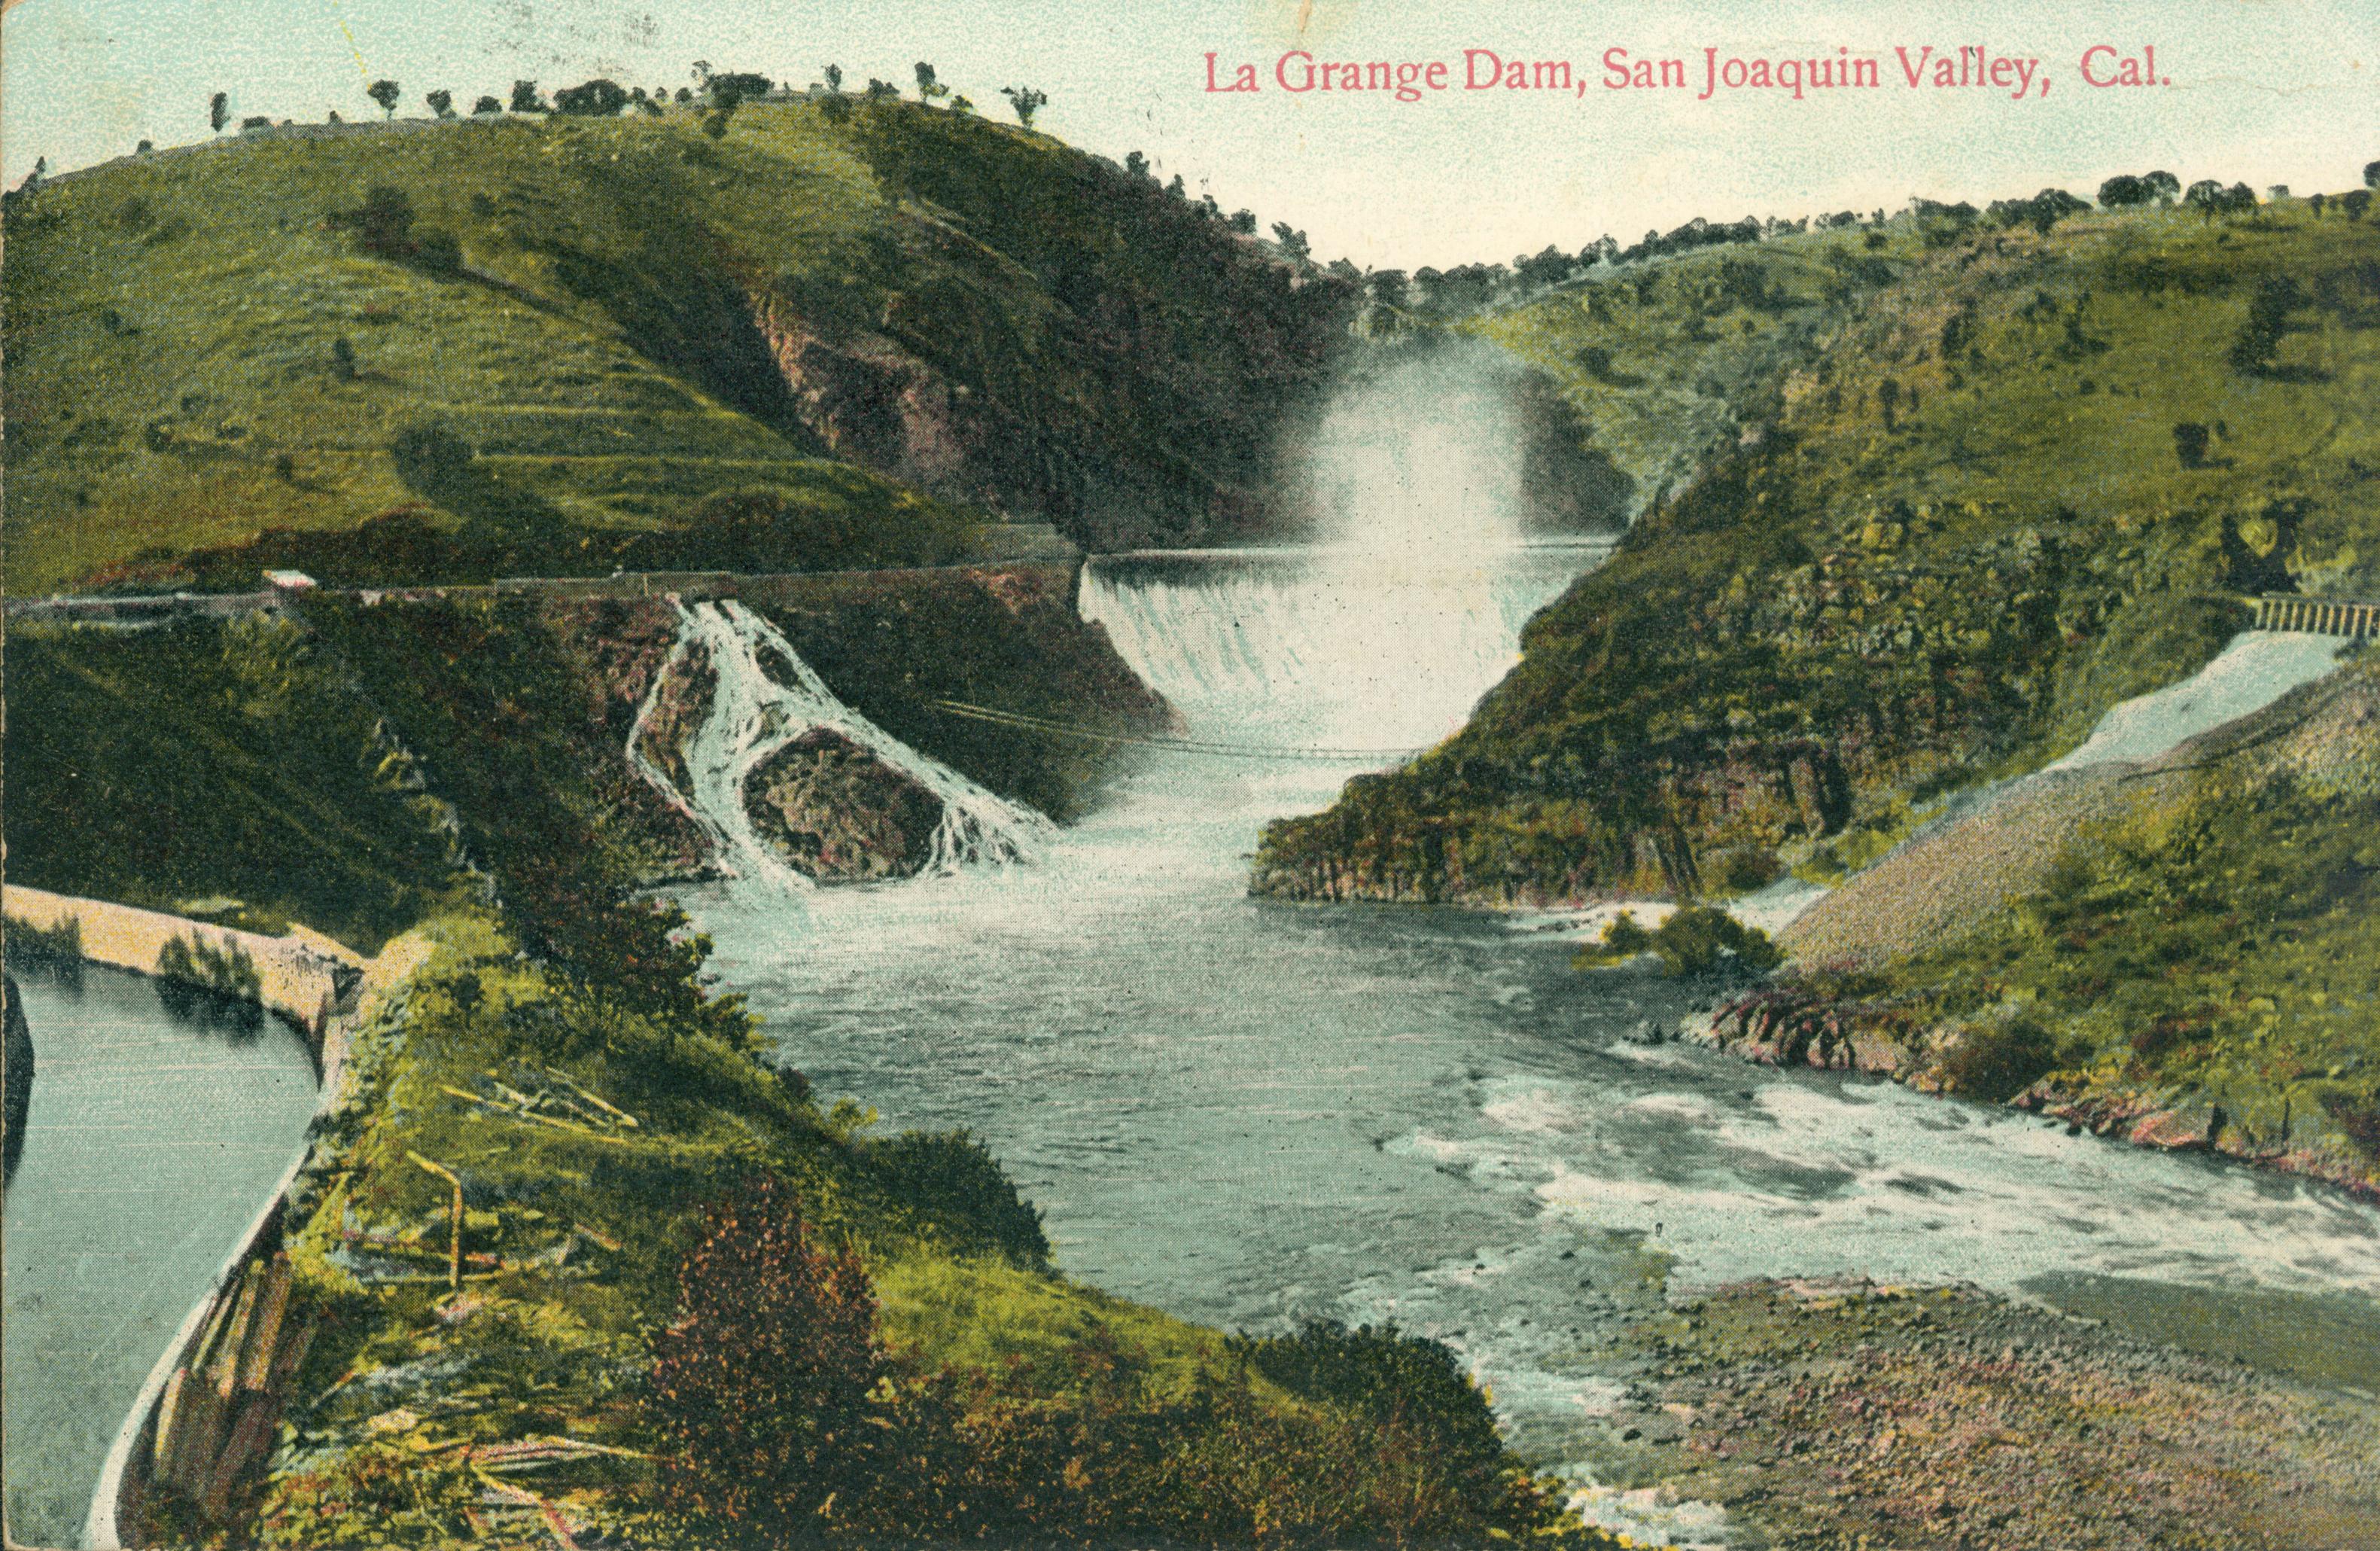 Shows La Grange dam releasing water, with an irrigation canal of to the left